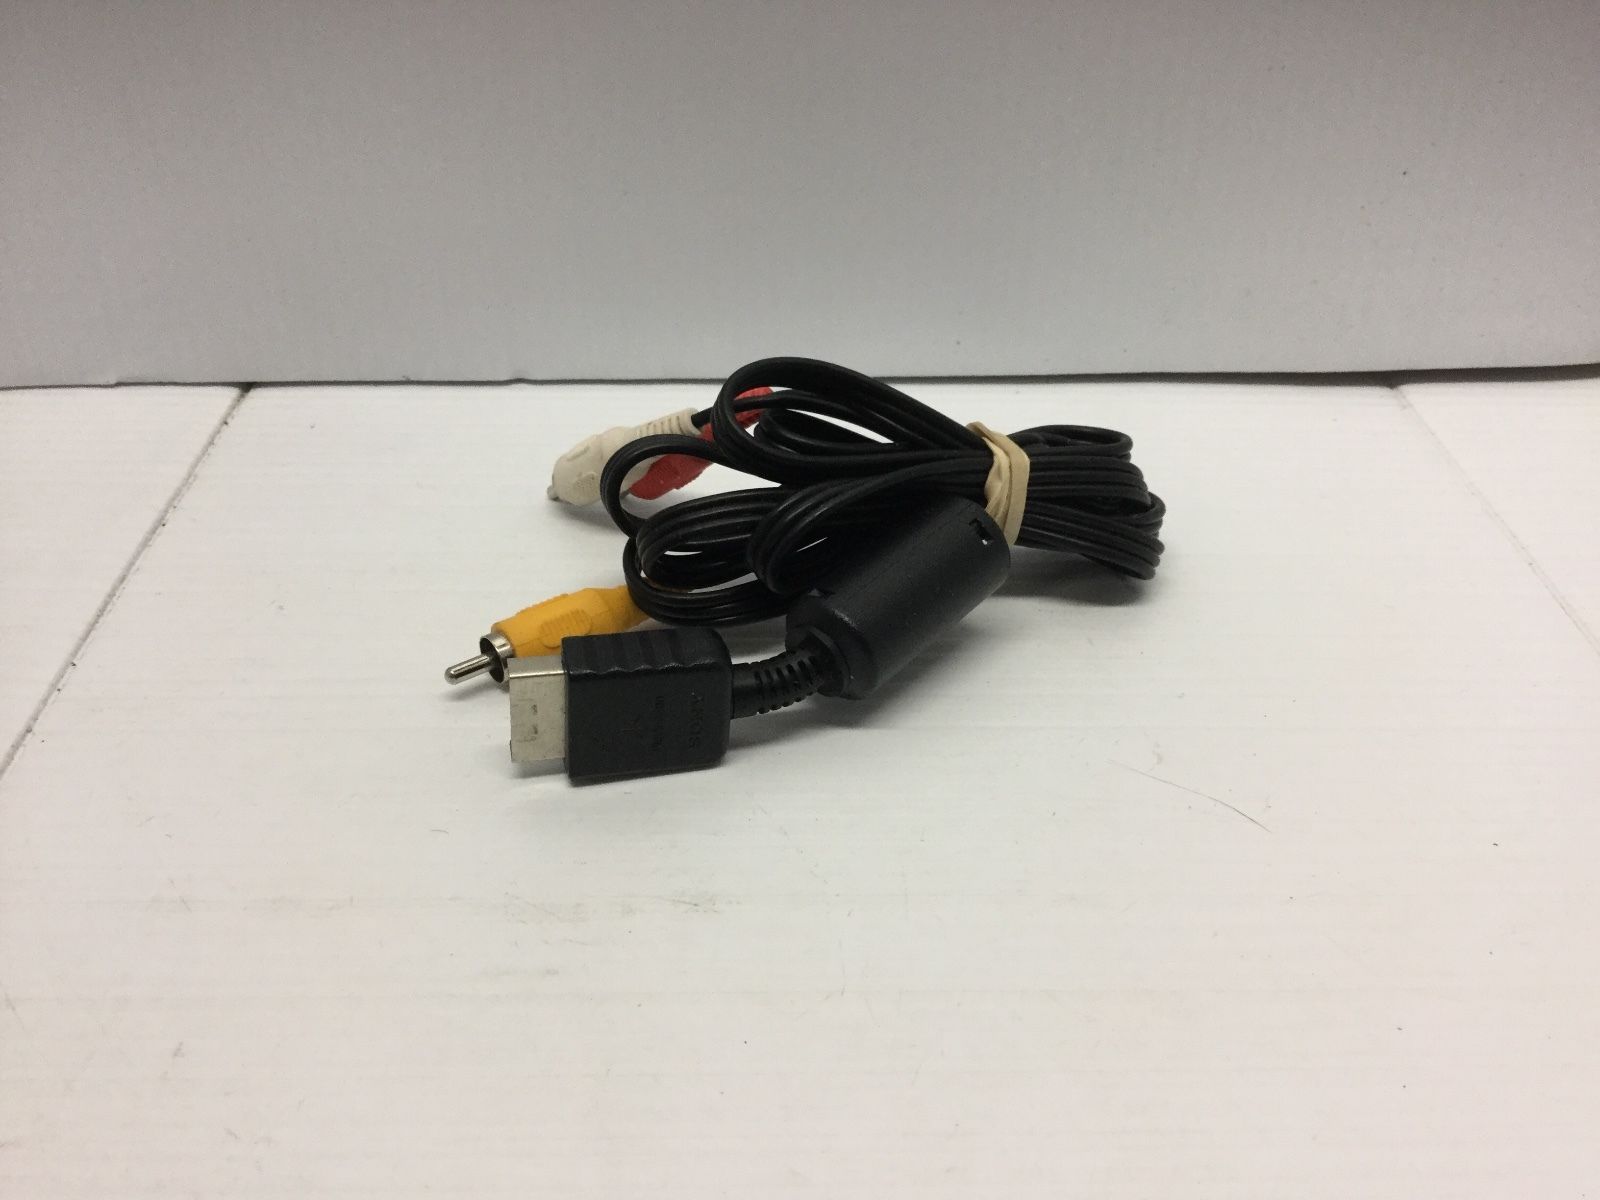 Genuine OEM Sony A/V Audio Video Red White Yellow RCA Cable Sony Playstation - $8.50